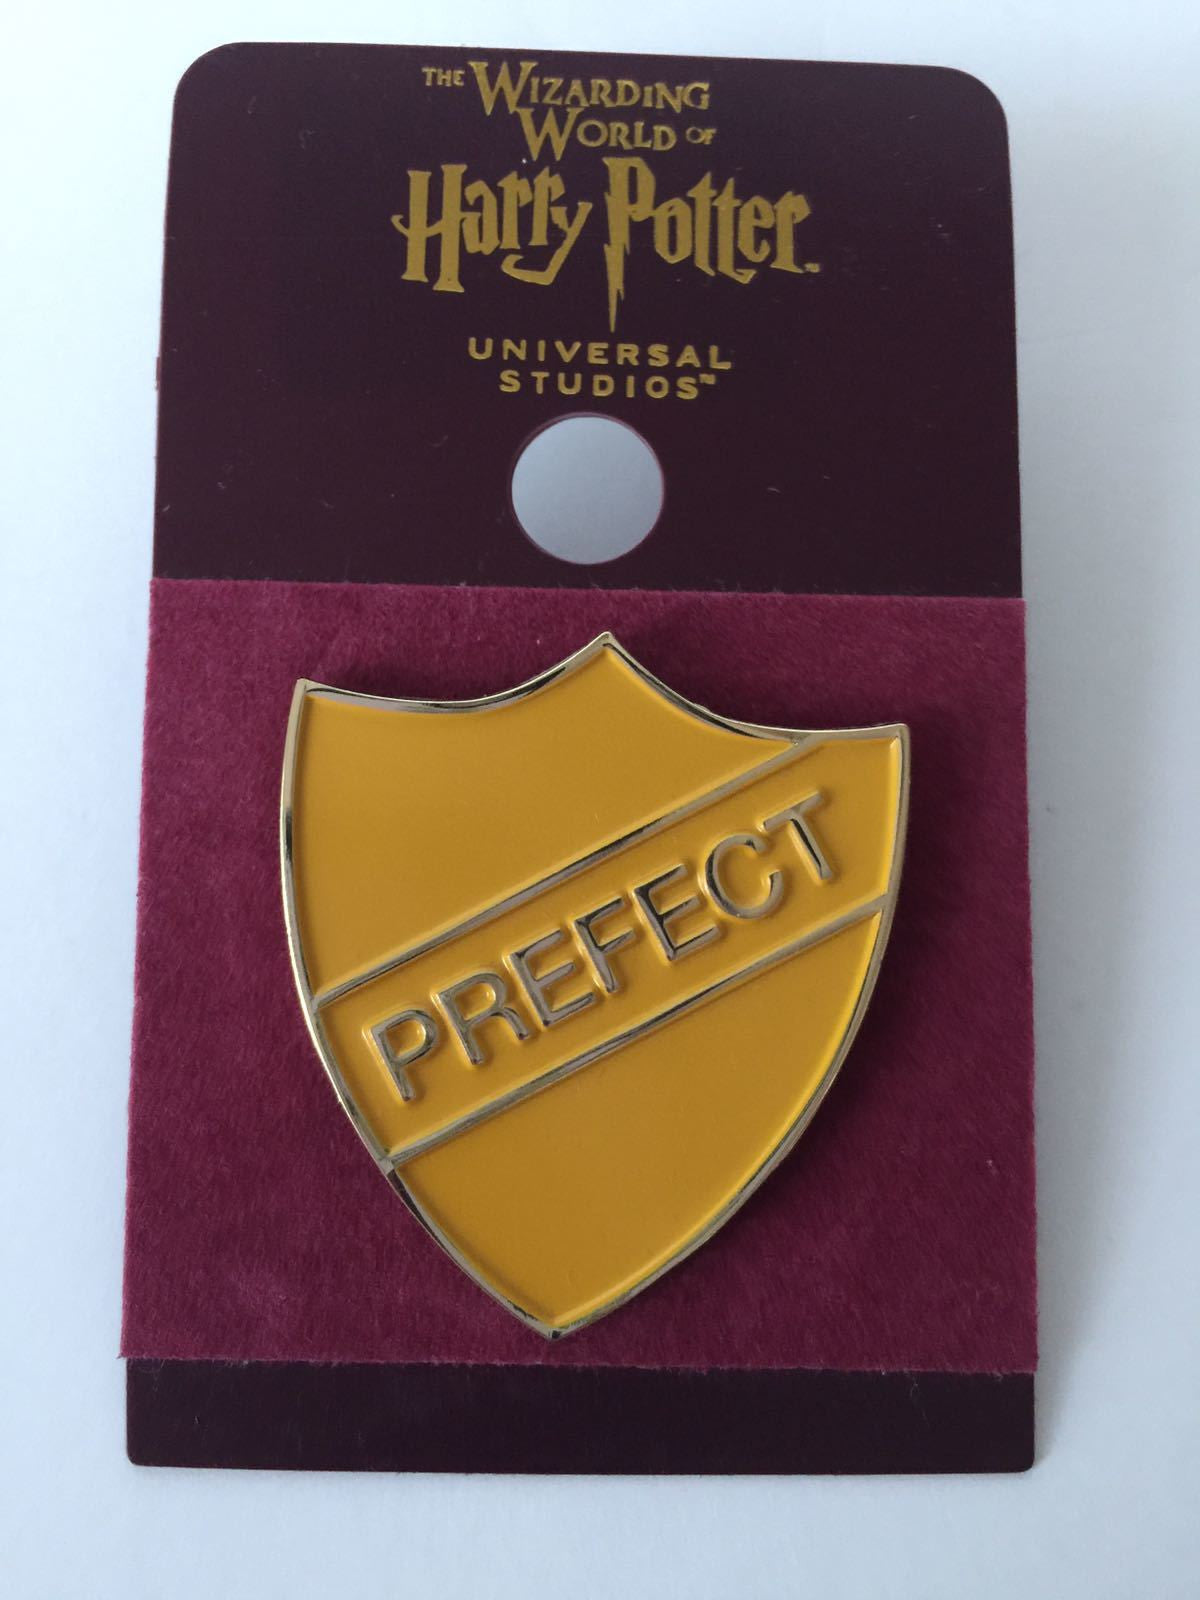 Universal Studios Wizarding World of Harry Potter Hufflepuff Prefect Pin New with Card